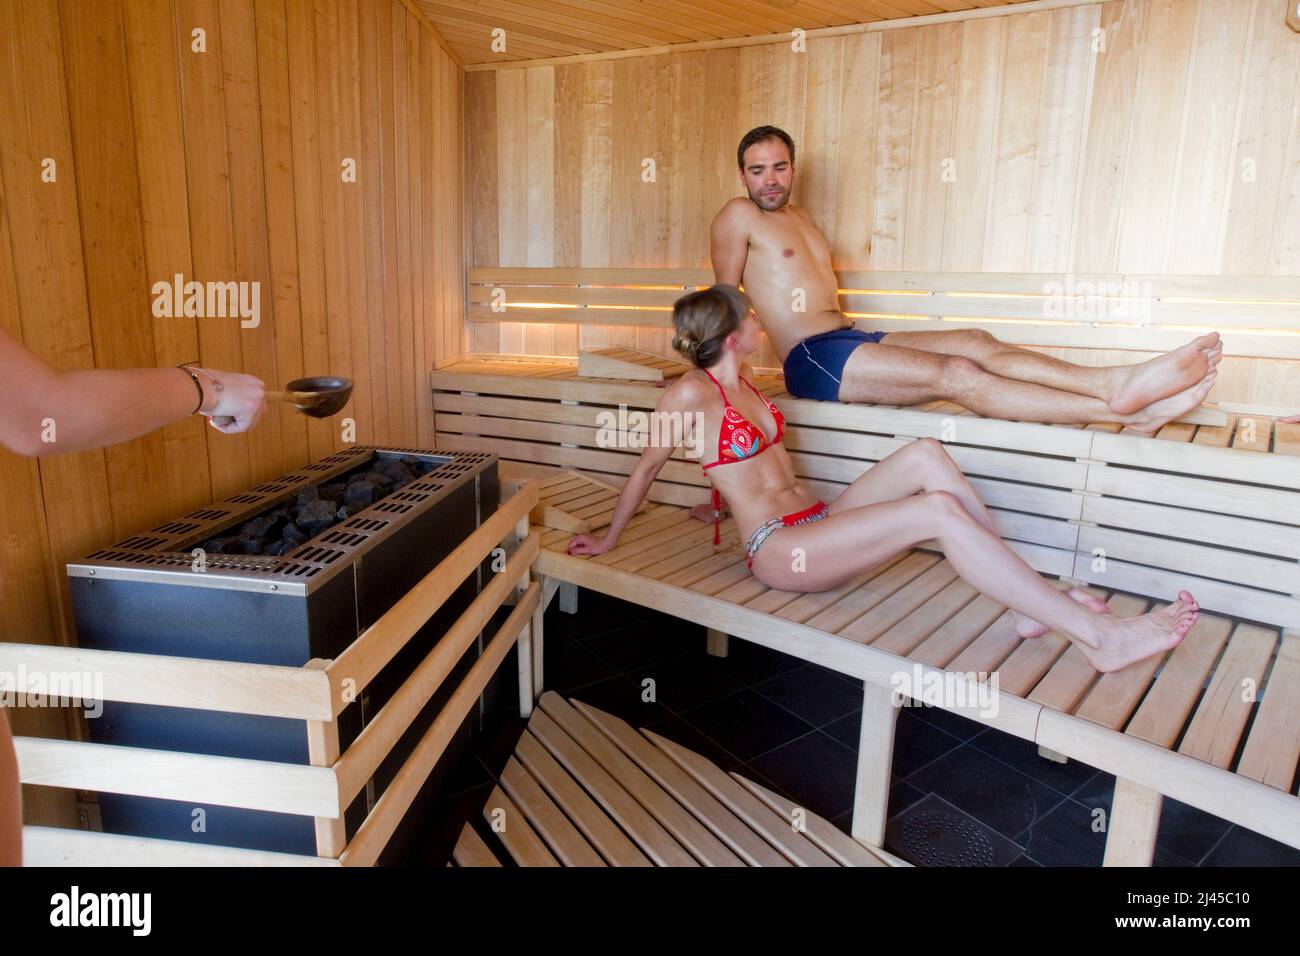 Hautes-Alpes department (Upper French Alps), Montgenevre (south-eastern France): illustration, one day in a spa and fitness centre. Man and woman in a Stock Photo